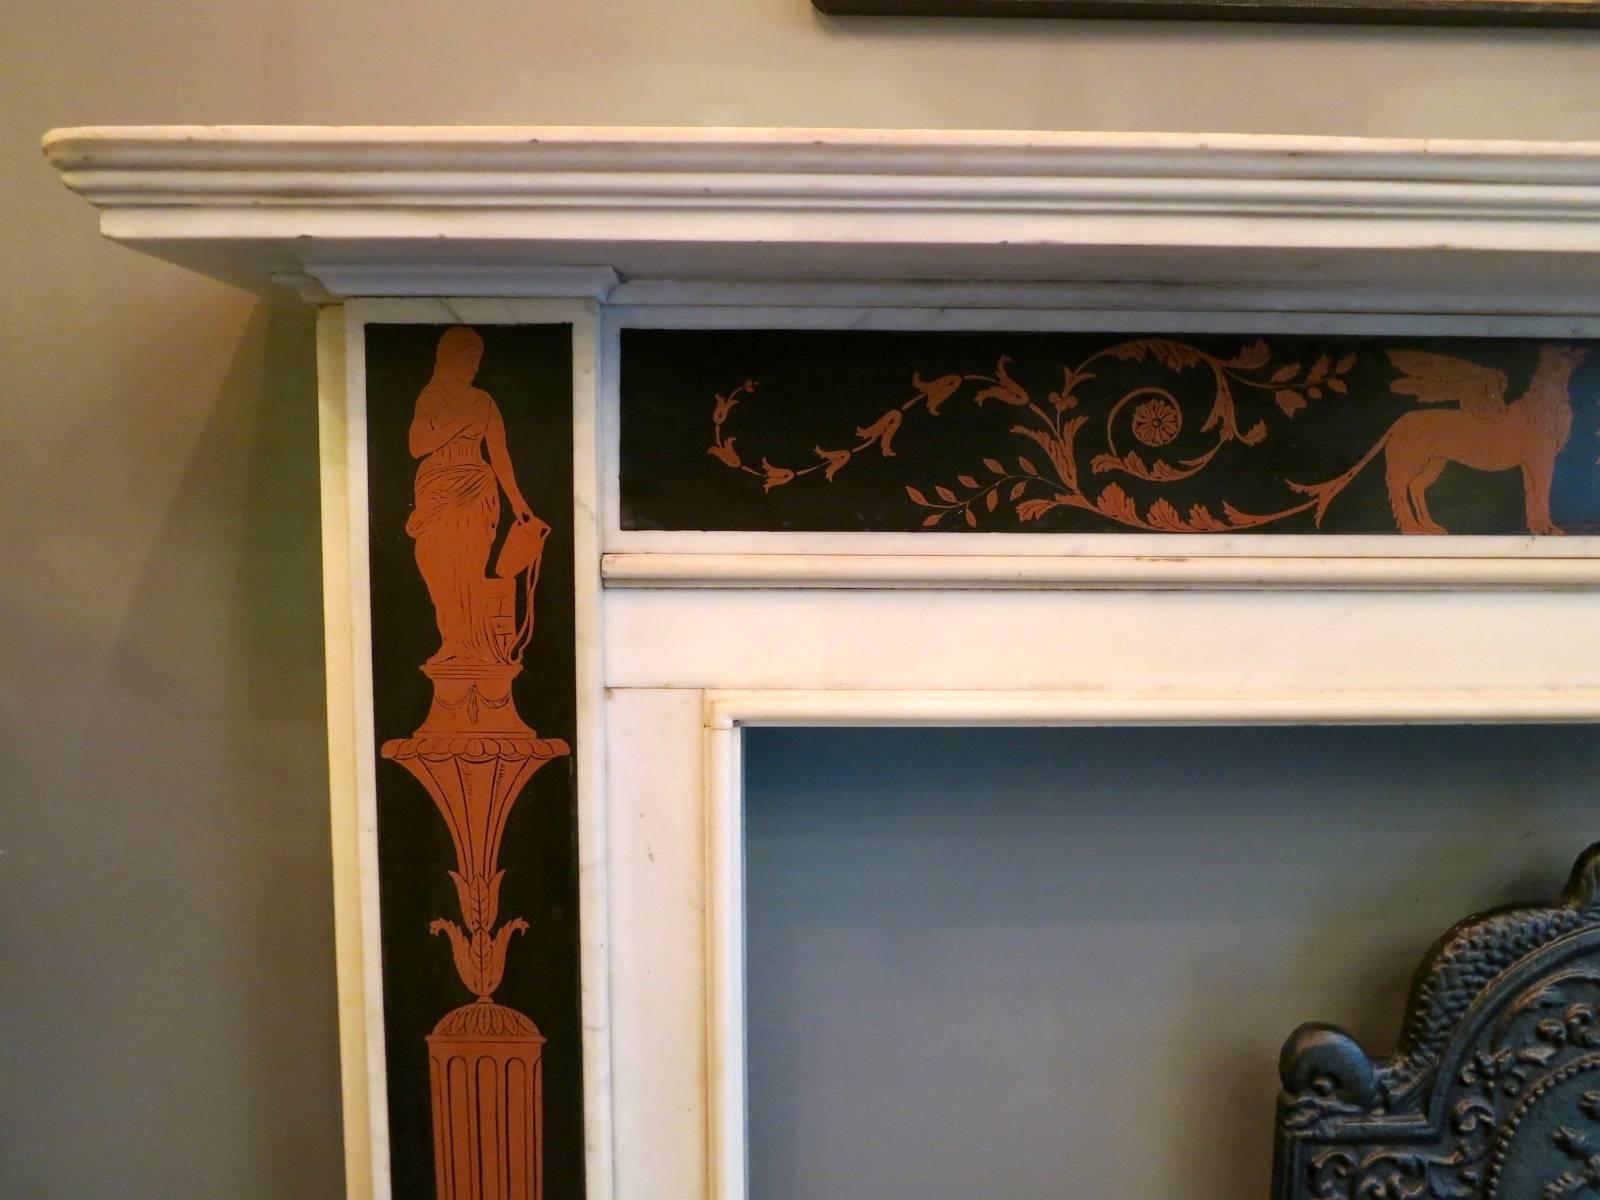 An Irish 19th century highly decorative and very well executed fireplace in Italian Statuary white marble with red and black Etruscan style  Scagliola inlaid jamb panels and frieze. The jambs depicting classical figures atop fluted tapering